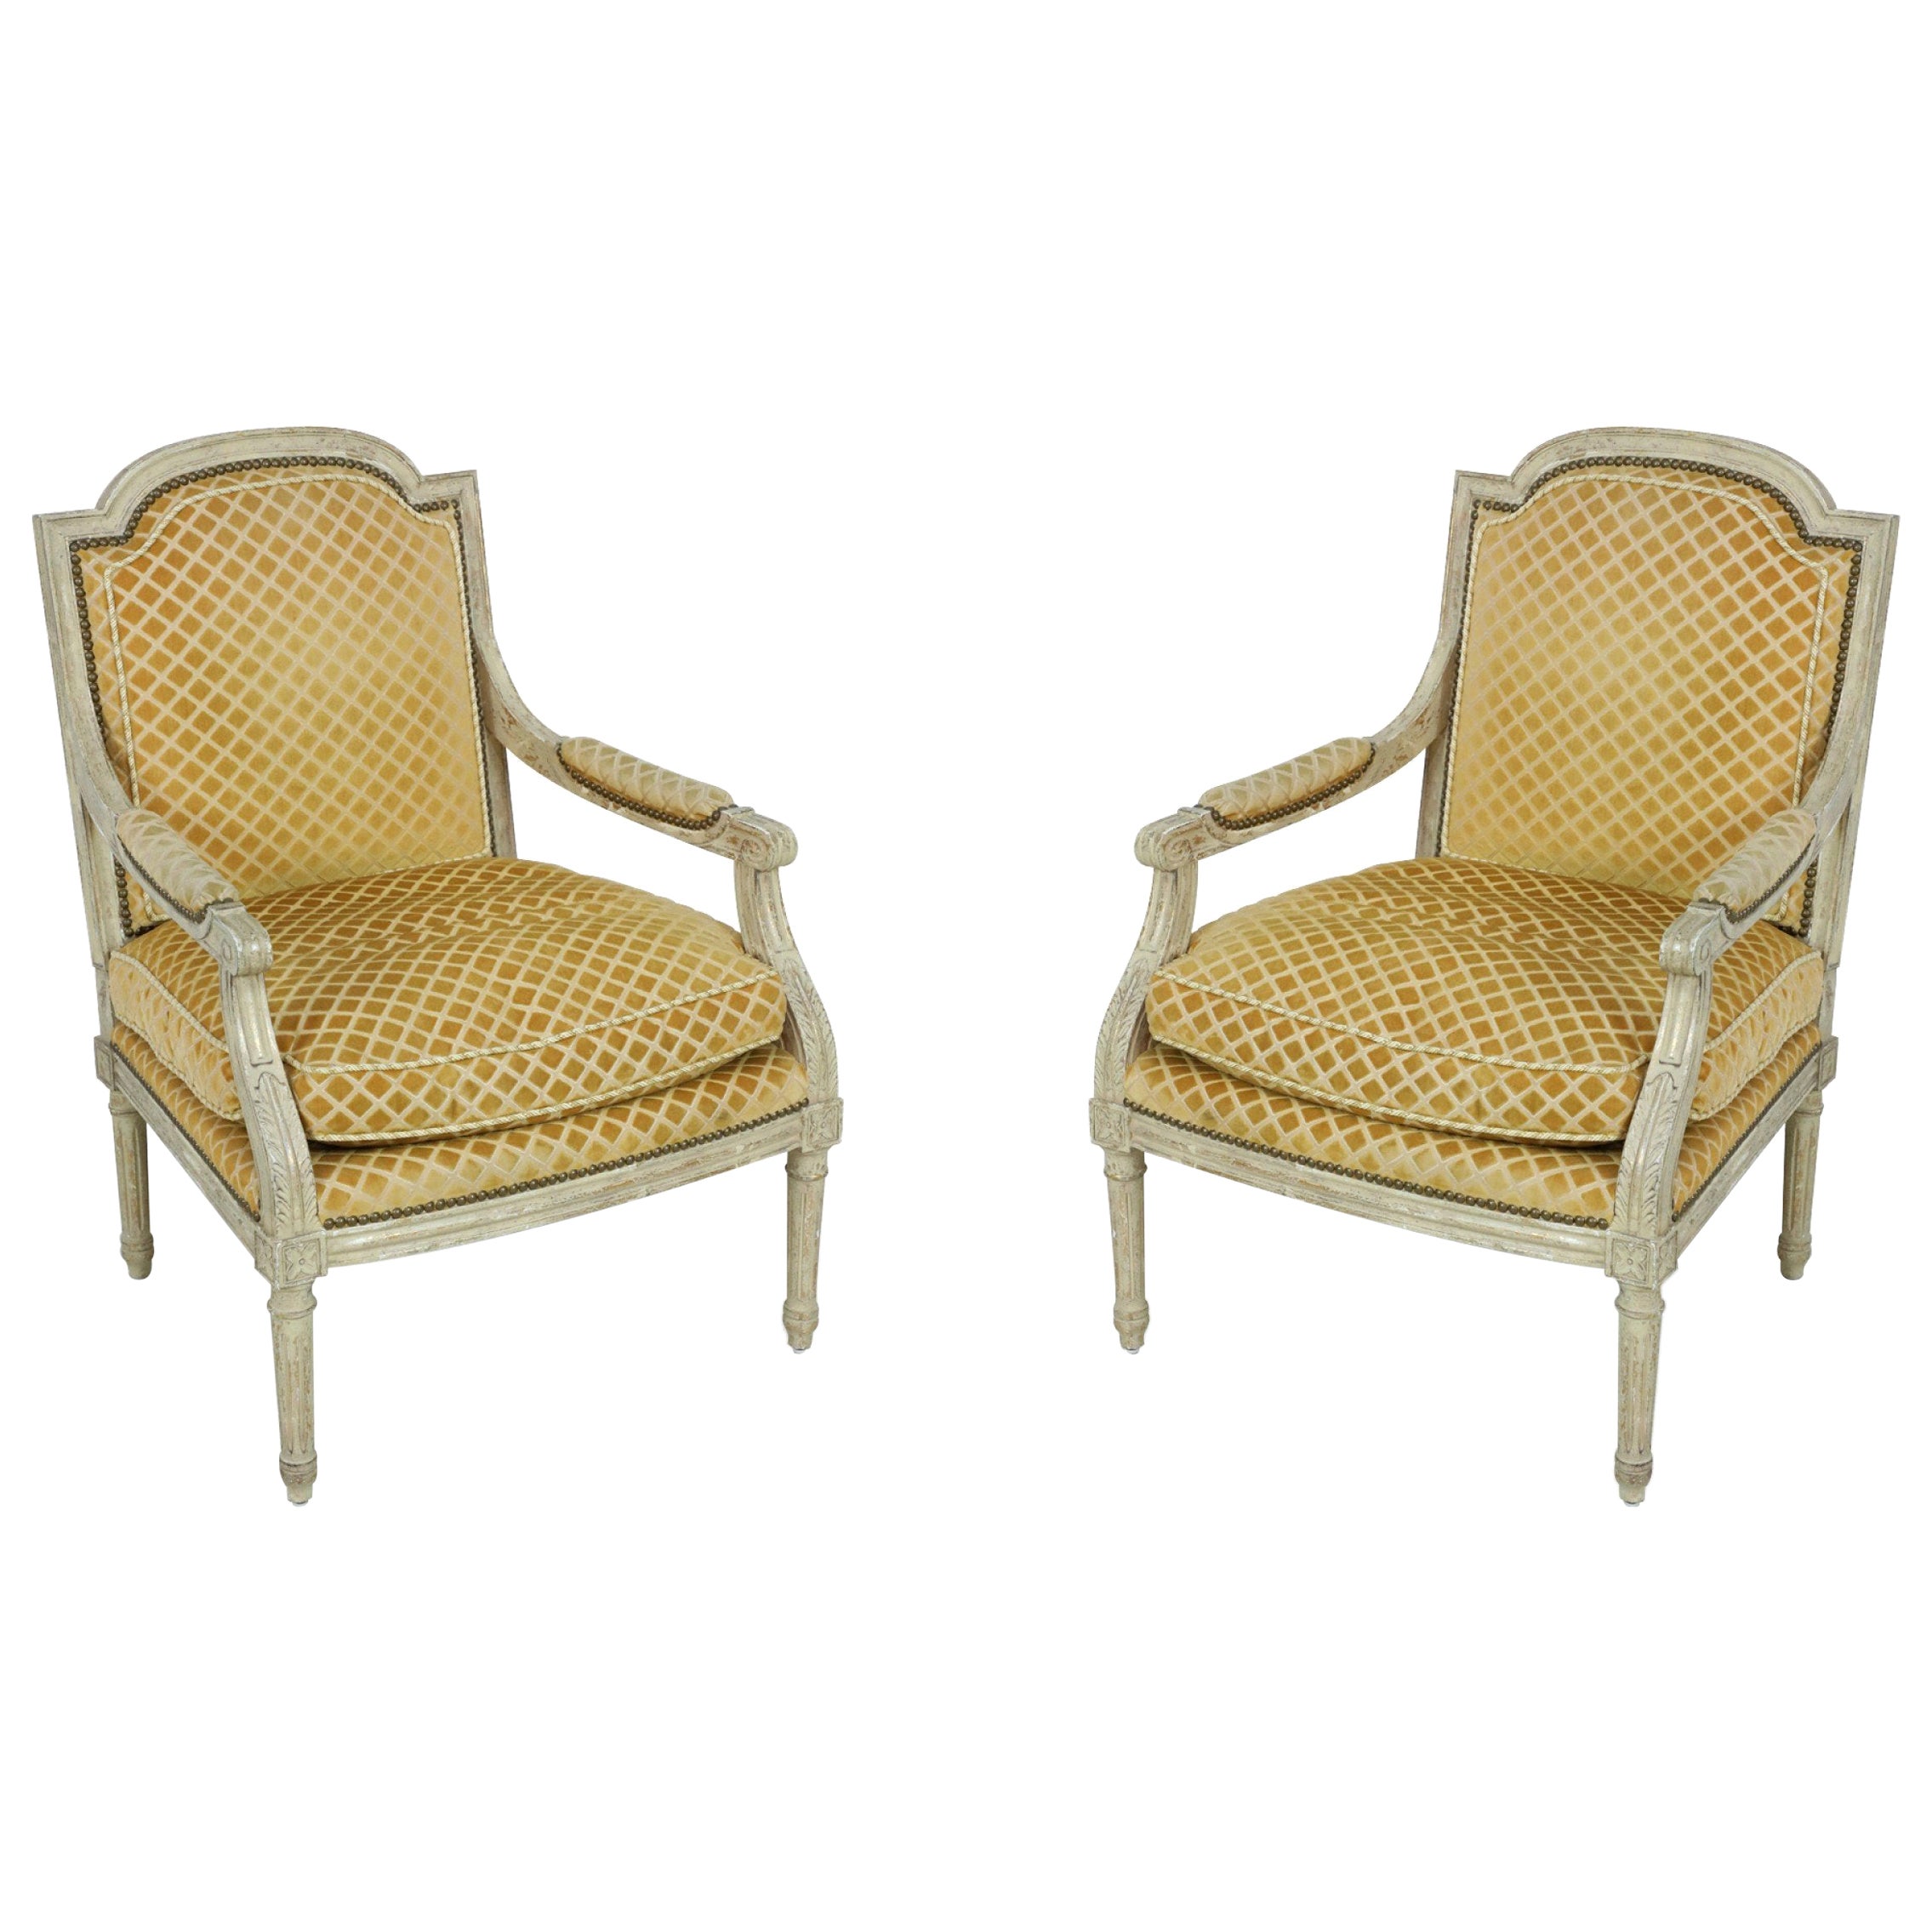 Pair of Louis XVI-Style Gold Upholstered Fauteuils / Armchairs